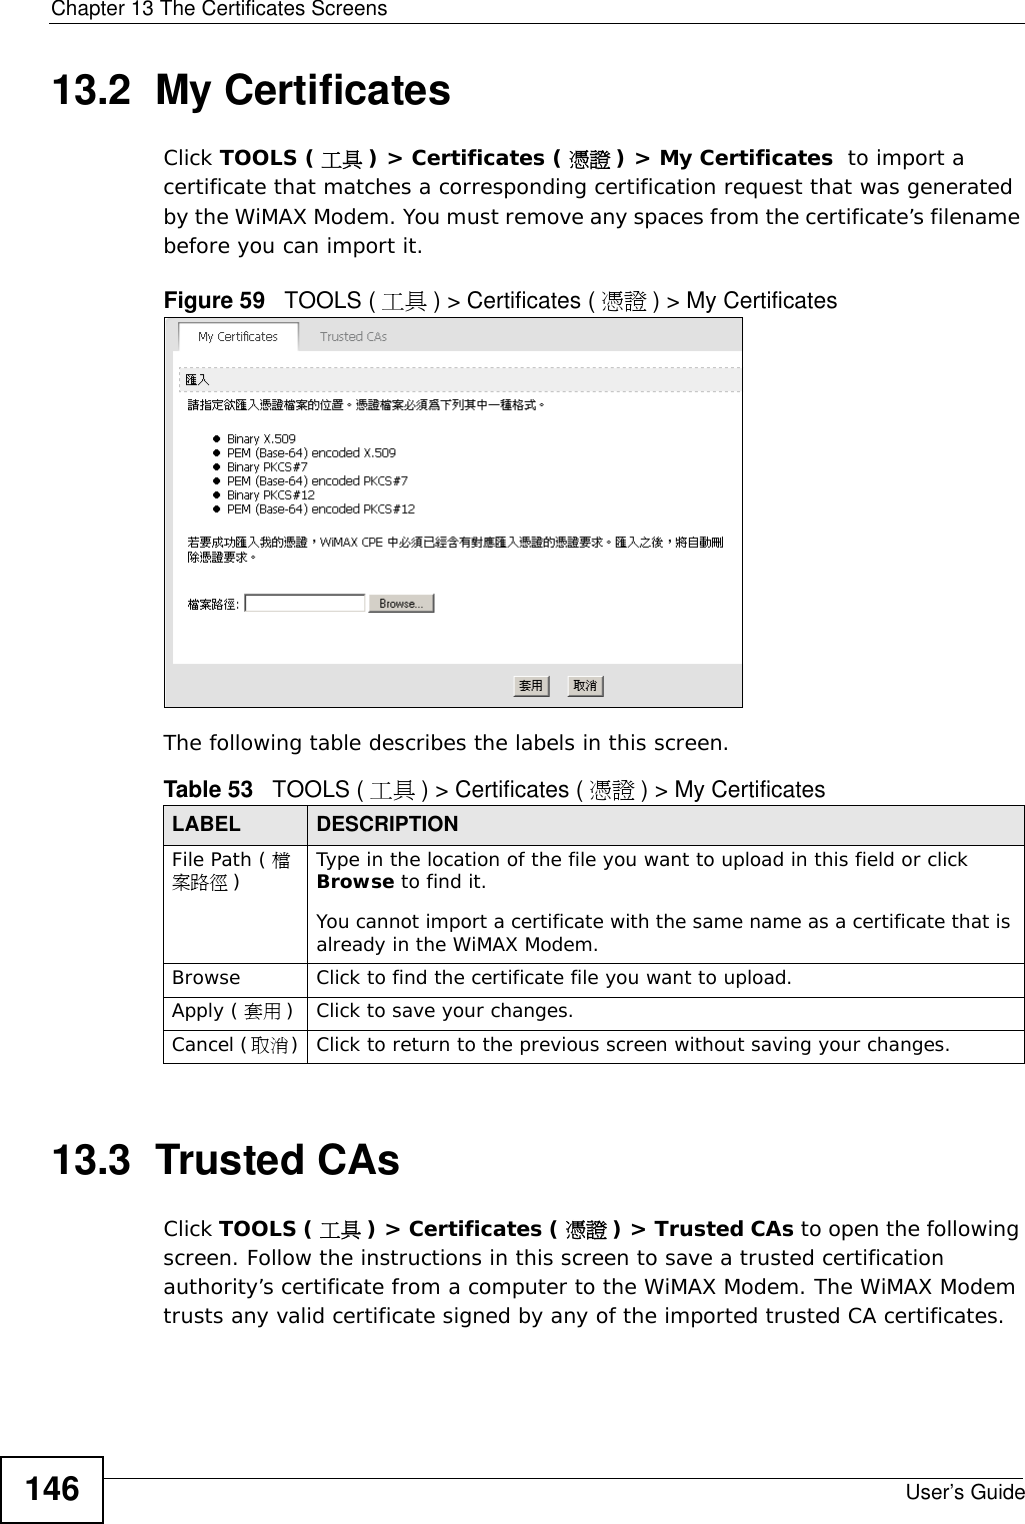 Chapter 13 The Certificates ScreensUser’s Guide14613.2  My CertificatesClick TOOLS ( 工具 ) &gt; Certificates ( 憑證 ) &gt; My Certificates  to import a certificate that matches a corresponding certification request that was generated by the WiMAX Modem. You must remove any spaces from the certificate’s filename before you can import it.Figure 59   TOOLS ( 工具 ) &gt; Certificates ( 憑證 ) &gt; My CertificatesThe following table describes the labels in this screen.  13.3  Trusted CAsClick TOOLS ( 工具 ) &gt; Certificates ( 憑證 ) &gt; Trusted CAs to open the following screen. Follow the instructions in this screen to save a trusted certification authority’s certificate from a computer to the WiMAX Modem. The WiMAX Modem trusts any valid certificate signed by any of the imported trusted CA certificates.Table 53   TOOLS ( 工具 ) &gt; Certificates ( 憑證 ) &gt; My CertificatesLABEL DESCRIPTIONFile Path ( 檔案路徑 )Type in the location of the file you want to upload in this field or click Browse to find it.You cannot import a certificate with the same name as a certificate that is already in the WiMAX Modem.Browse  Click to find the certificate file you want to upload. Apply ( 套用 )Click to save your changes.Cancel (取消)Click to return to the previous screen without saving your changes.